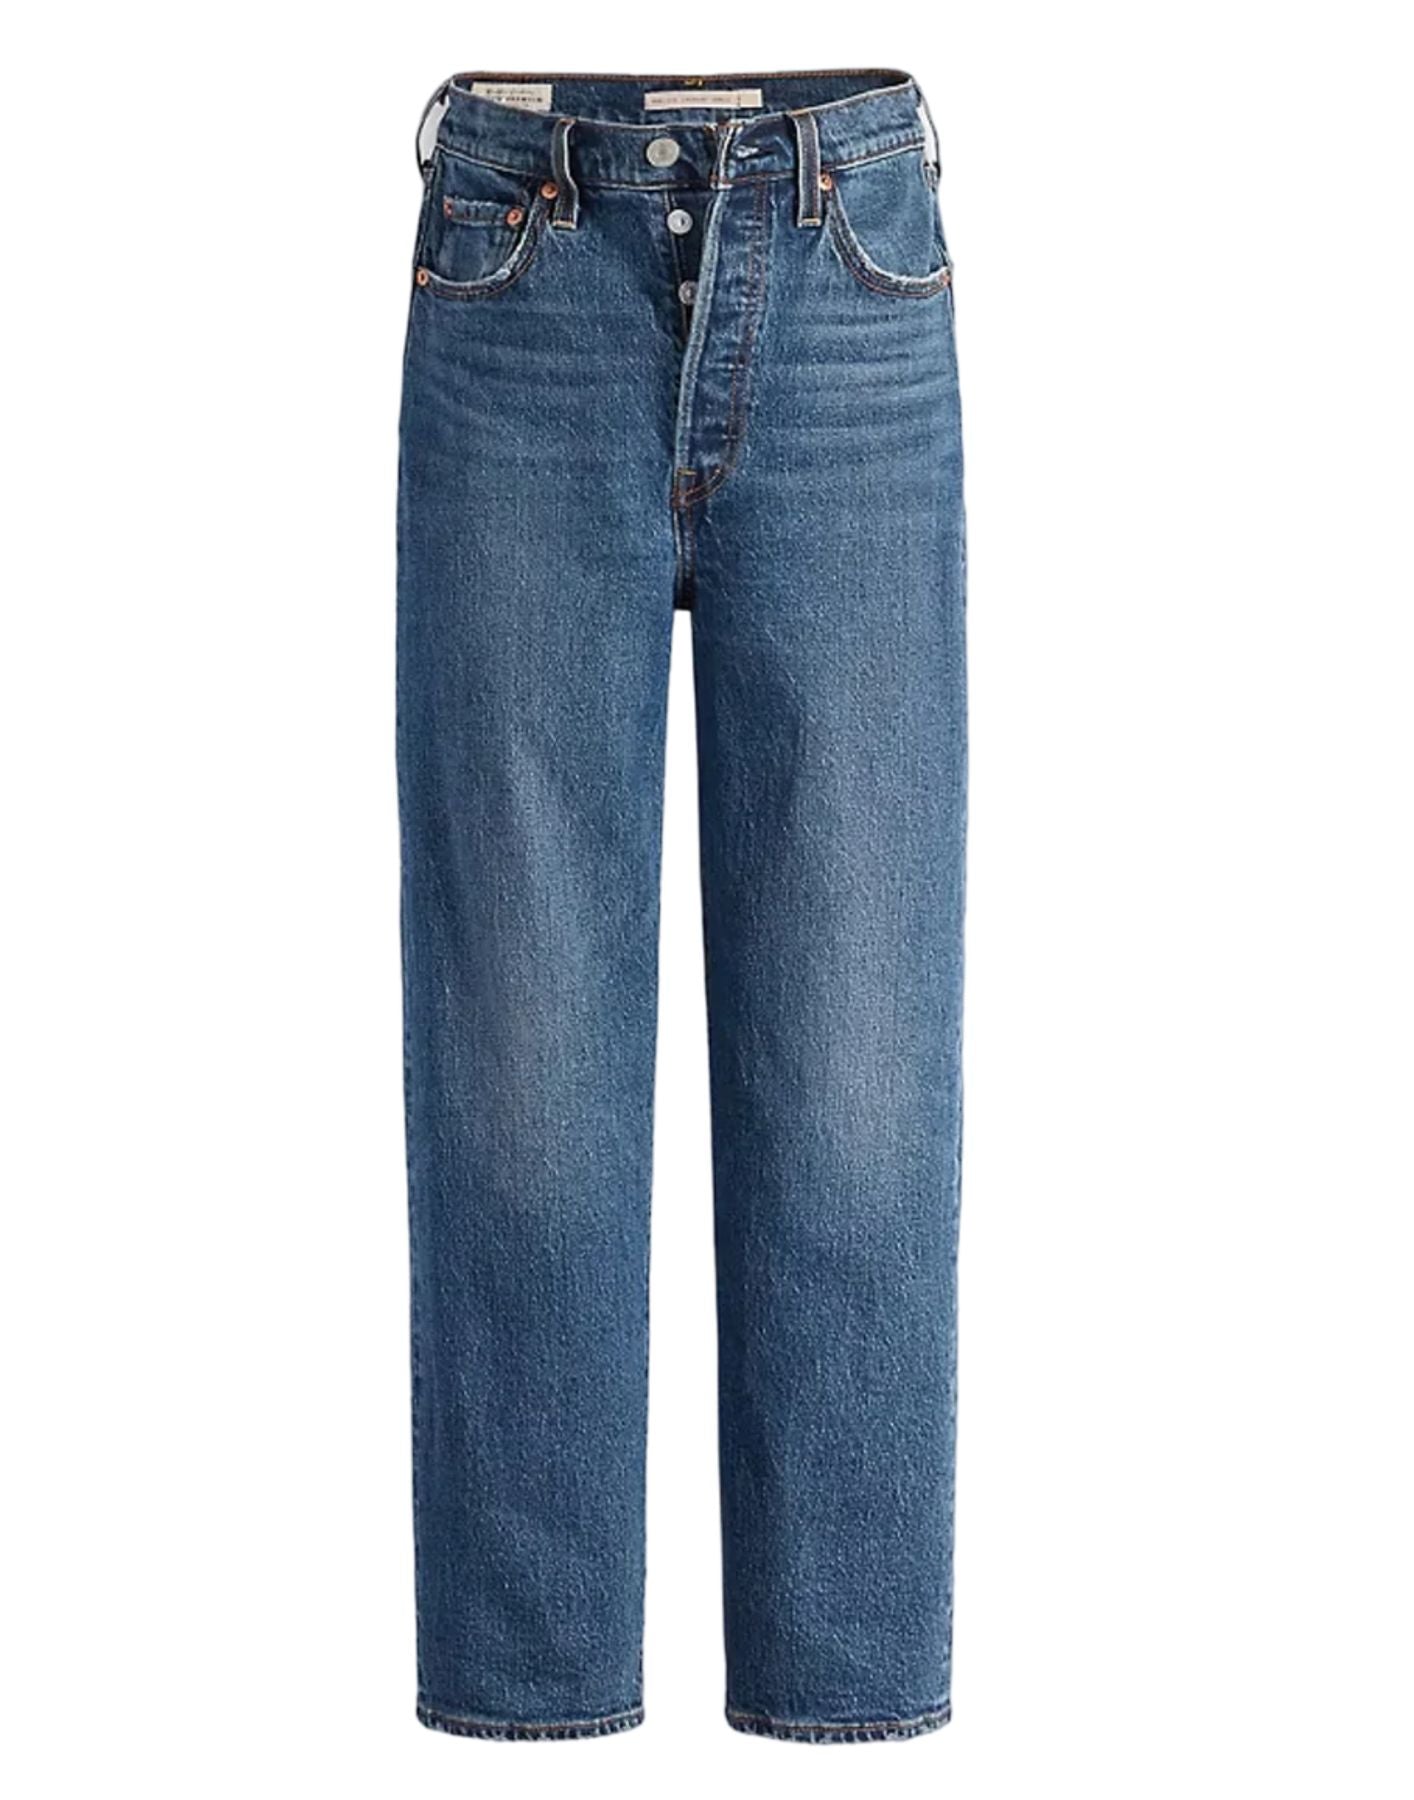 Jeans Woman 726930163 Valley View Levi's